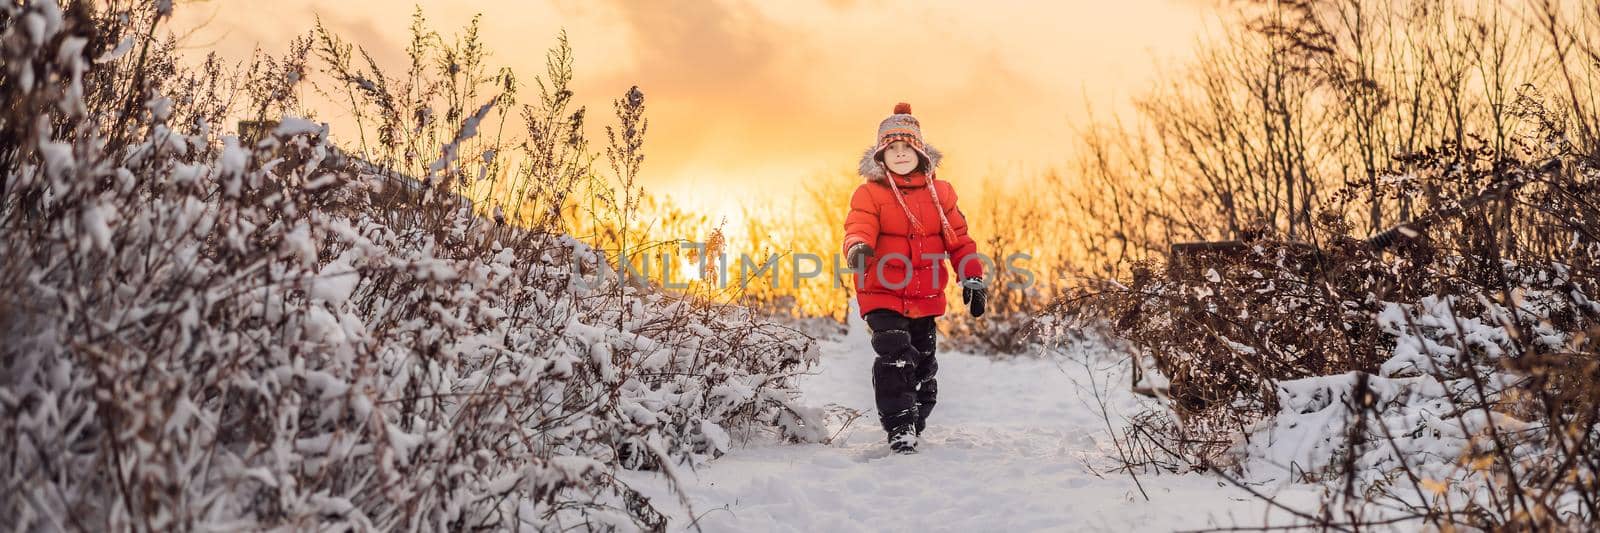 Cute boy in red winter clothes runs fun in the snow. Winter Fun Outdoor Concepts BANNER, LONG FORMAT by galitskaya